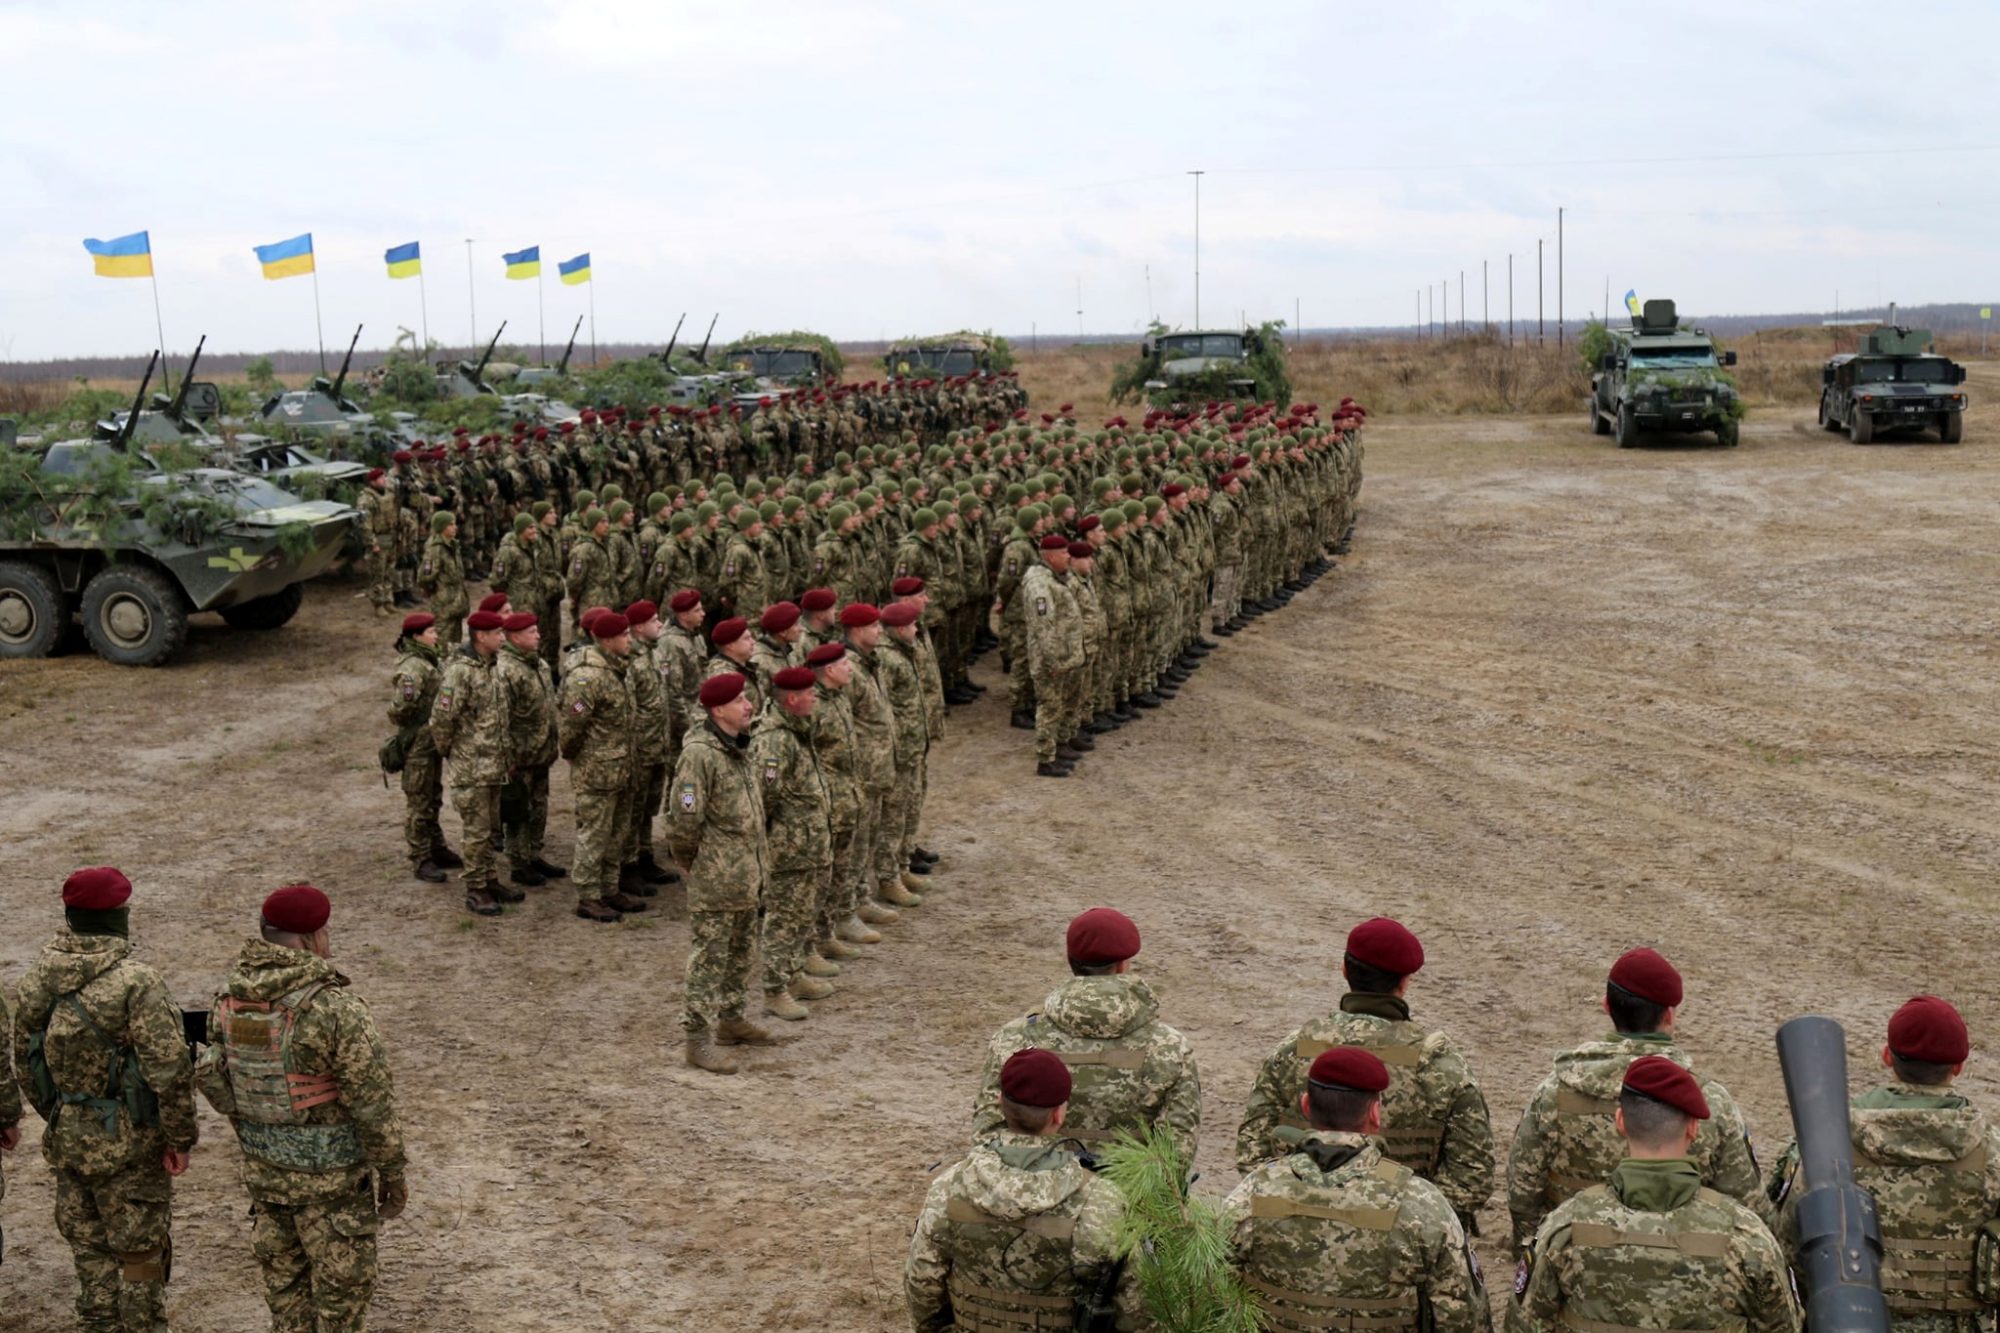 The war in Ukraine re-enacted on a tiny scale by the model-building  community